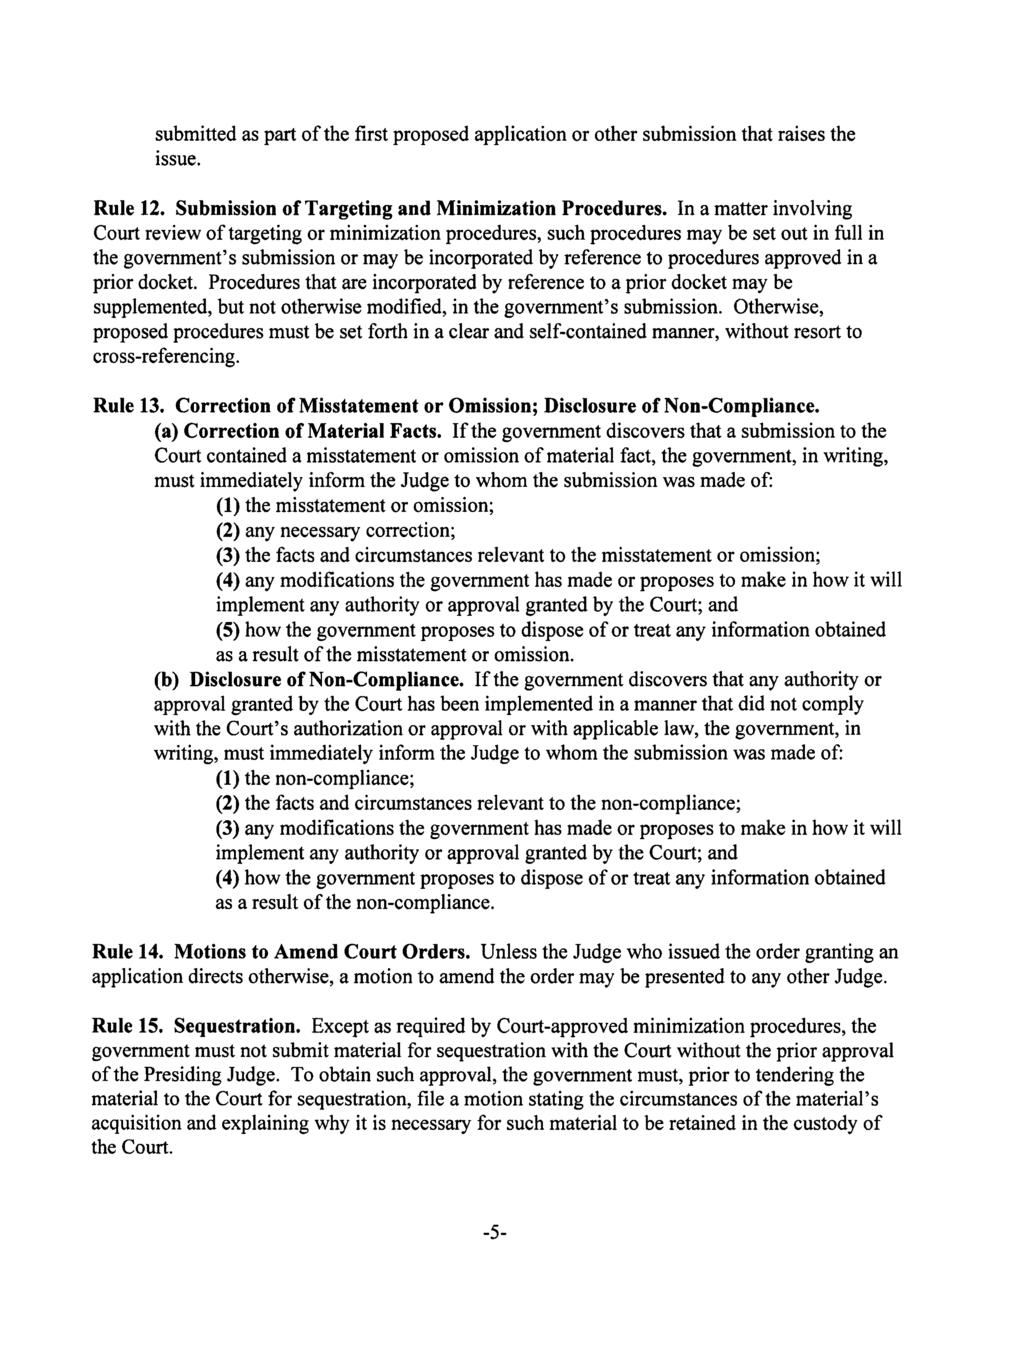 submitted as part of the first proposed application or other submission that raises the issue. Rule 12. Submission of Targeting and Minimization Procedures.